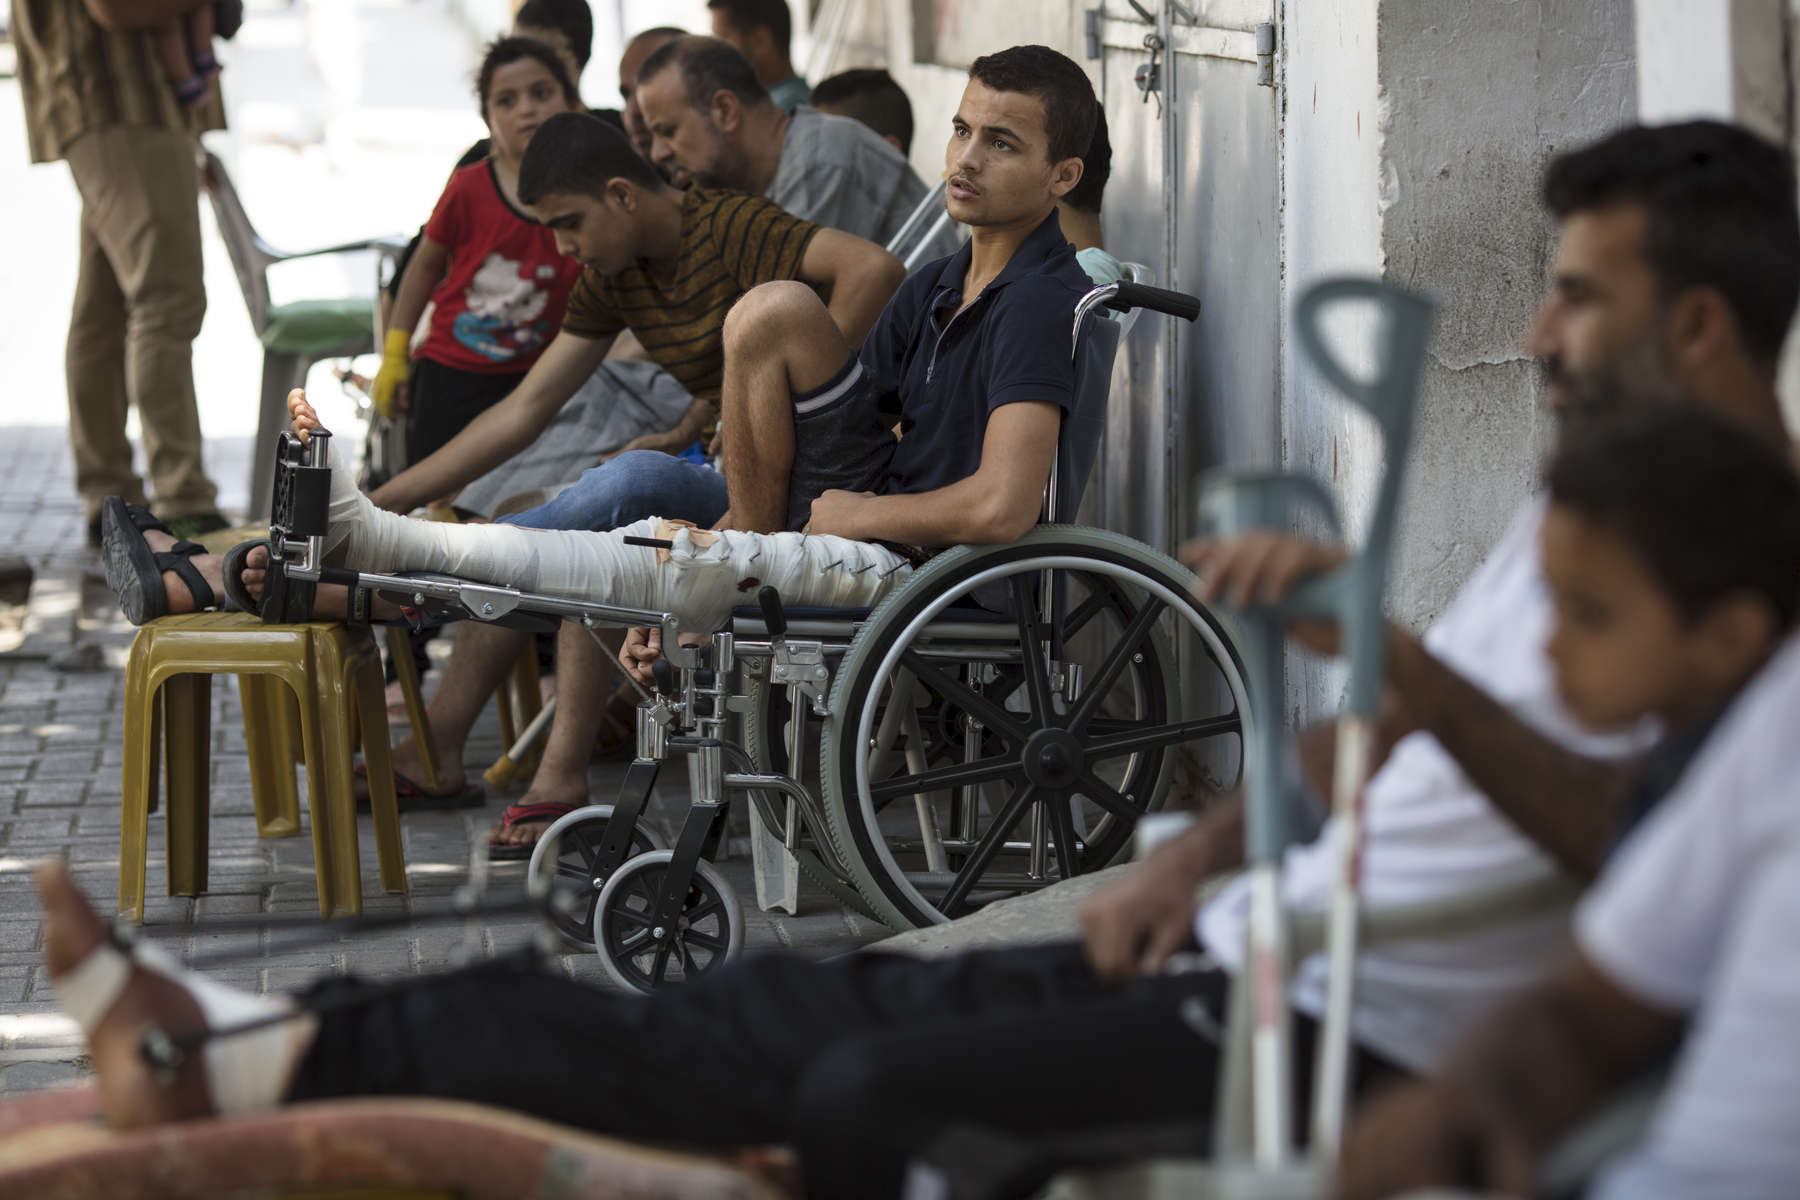 GAZA CITY, GAZA STRIP- MAY 20,2018: At the Médecins Sans Frontières (MSF) clinic male patients are lined up awaiting medical treatment on May 20,2018 in Gaza city, Gaza strip. MSF has focused their attention on treating injuries  caused by bullet wounds.According to the International Committee of the Red Cross (ICRC), 13,000 Palestinians were wounded (as of June 19, 2018), the majority severely, with some 1,400 struck by three to five bullets. No Israelis were physically harmed during this time period, Israel's use of deadly force was condemned during the UN general assembly on June 13 th along with other human rights organizations. The Israeli military (IDF) started using new weaponry, explosive bullets that shatter bones, tissue, destroying veins and arteries, the aim is to create a handicapped community, especially amongst the young male population. Many of the wounded protesters have to undergo multiple surgeries to try to save their limbs, and in some cases amputation is the only solution. With limited healthcare available in Gaza many were sent to Jordan and Turkey for further treatment. More issues that plague Gaza include a water supply that is 95 percent contaminated and a population forced to live without electricity for 21 hours a day. Gaza is compared to Venezuela with almost half of it’s labor force unemployed. Everyone is well aware that Gaza's two million inhabitants are trapped in a cycle of violence and poverty, living in an open air prison. The problems and complications affecting Gaza today are overwhelming. The world, seemingly accustomed to the suffering of the Gazan people turns a blind eye. (Photo by Paula Bronstein ) 